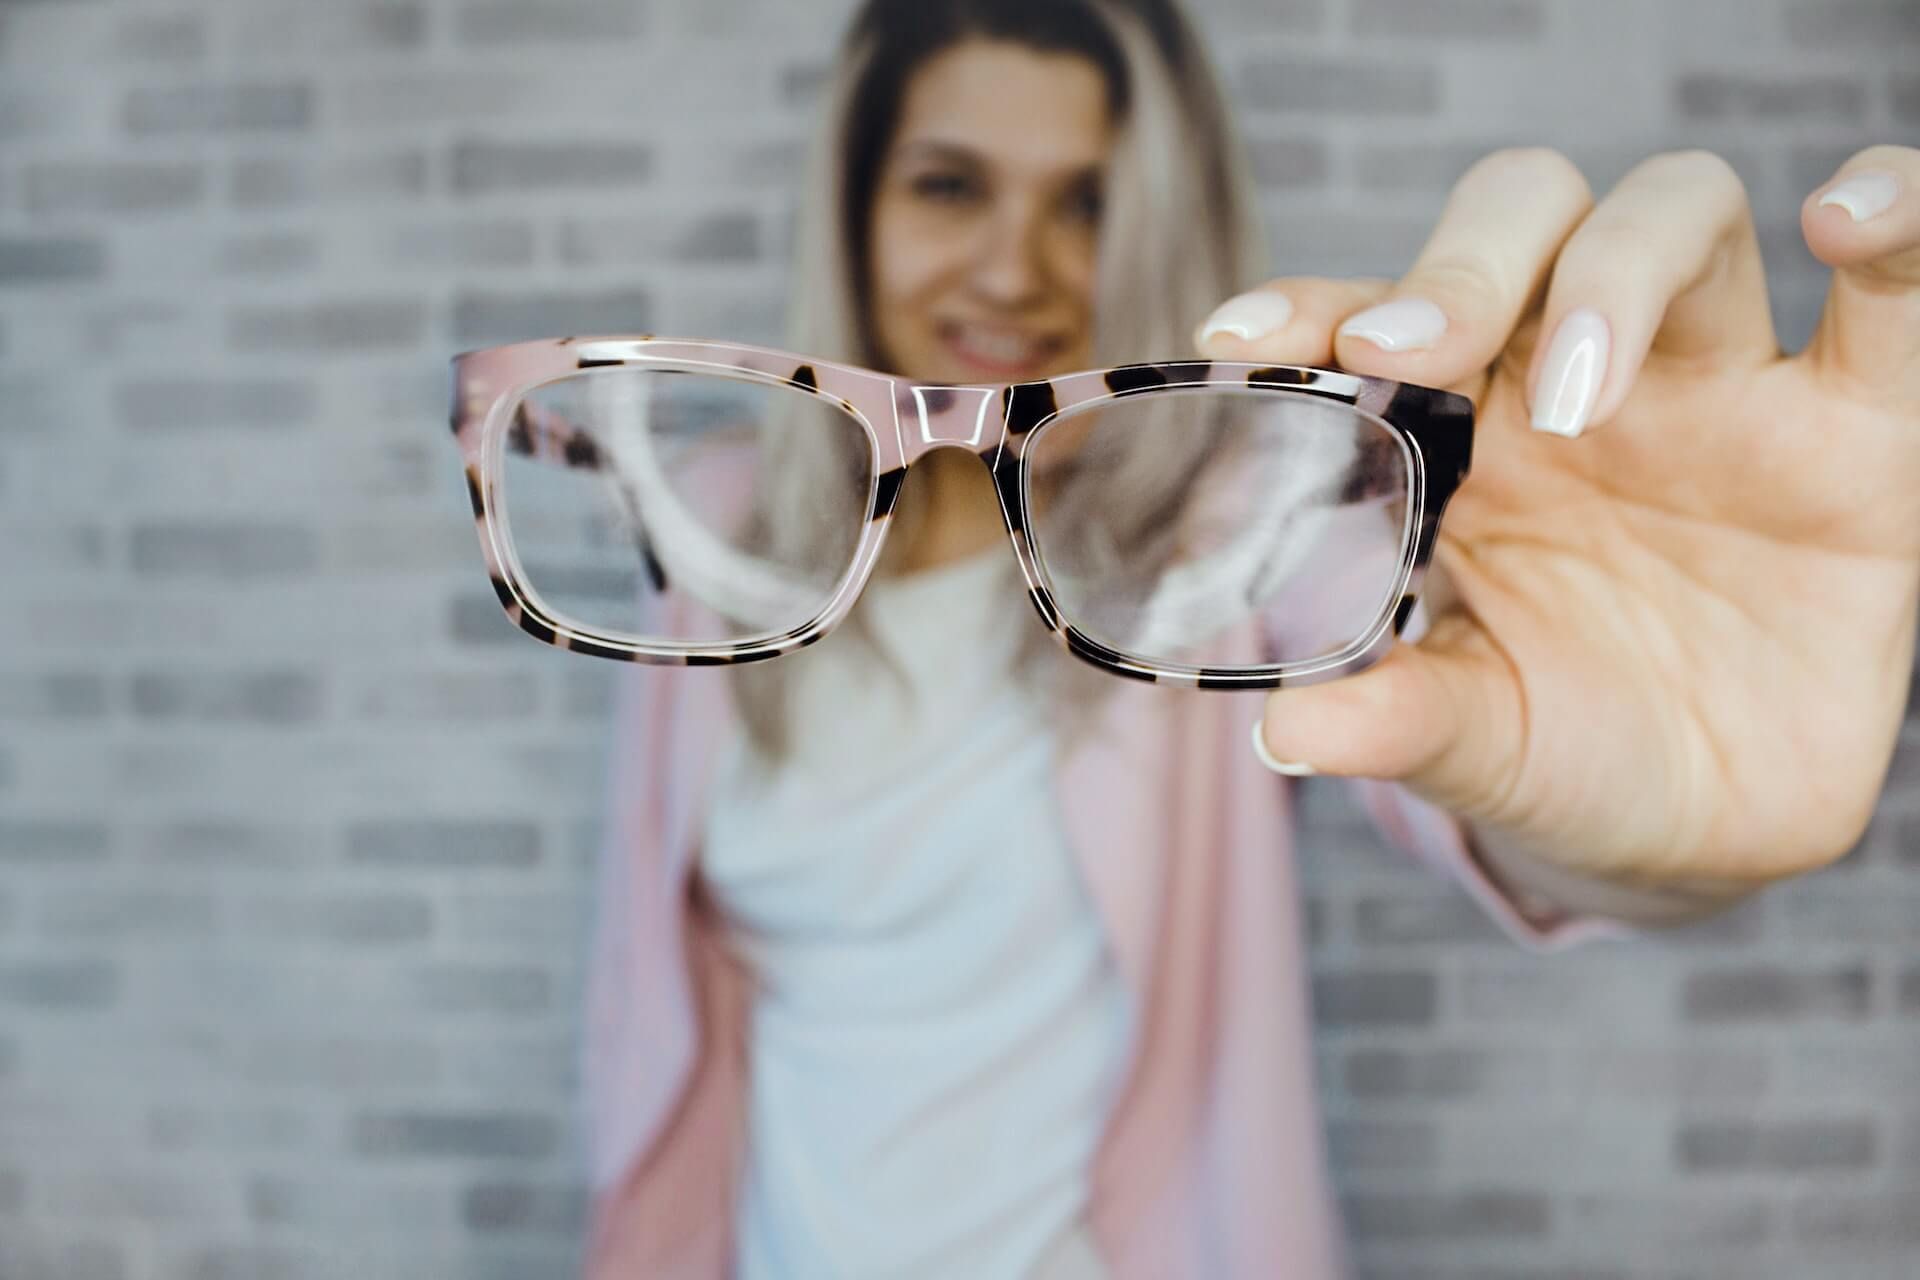 How to Tell if Your Glasses are for Nearsighted or Farsighted